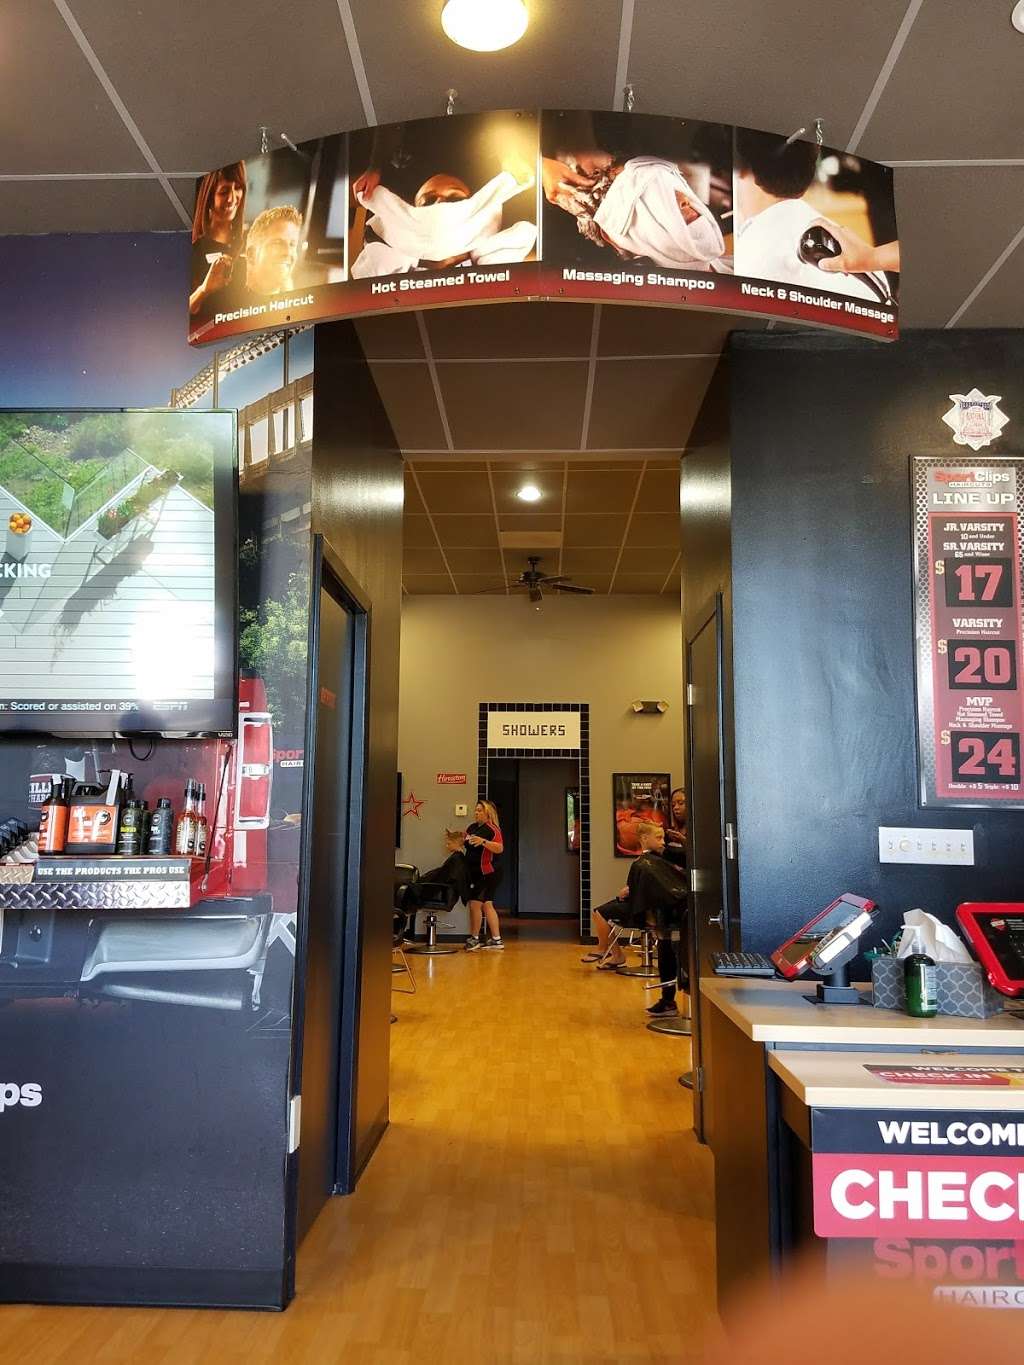 Sport Clips Haircuts of Sienna Plantation | 8840 Hwy 6 Suite 120, Missouri City, TX 77459, USA | Phone: (281) 778-3870